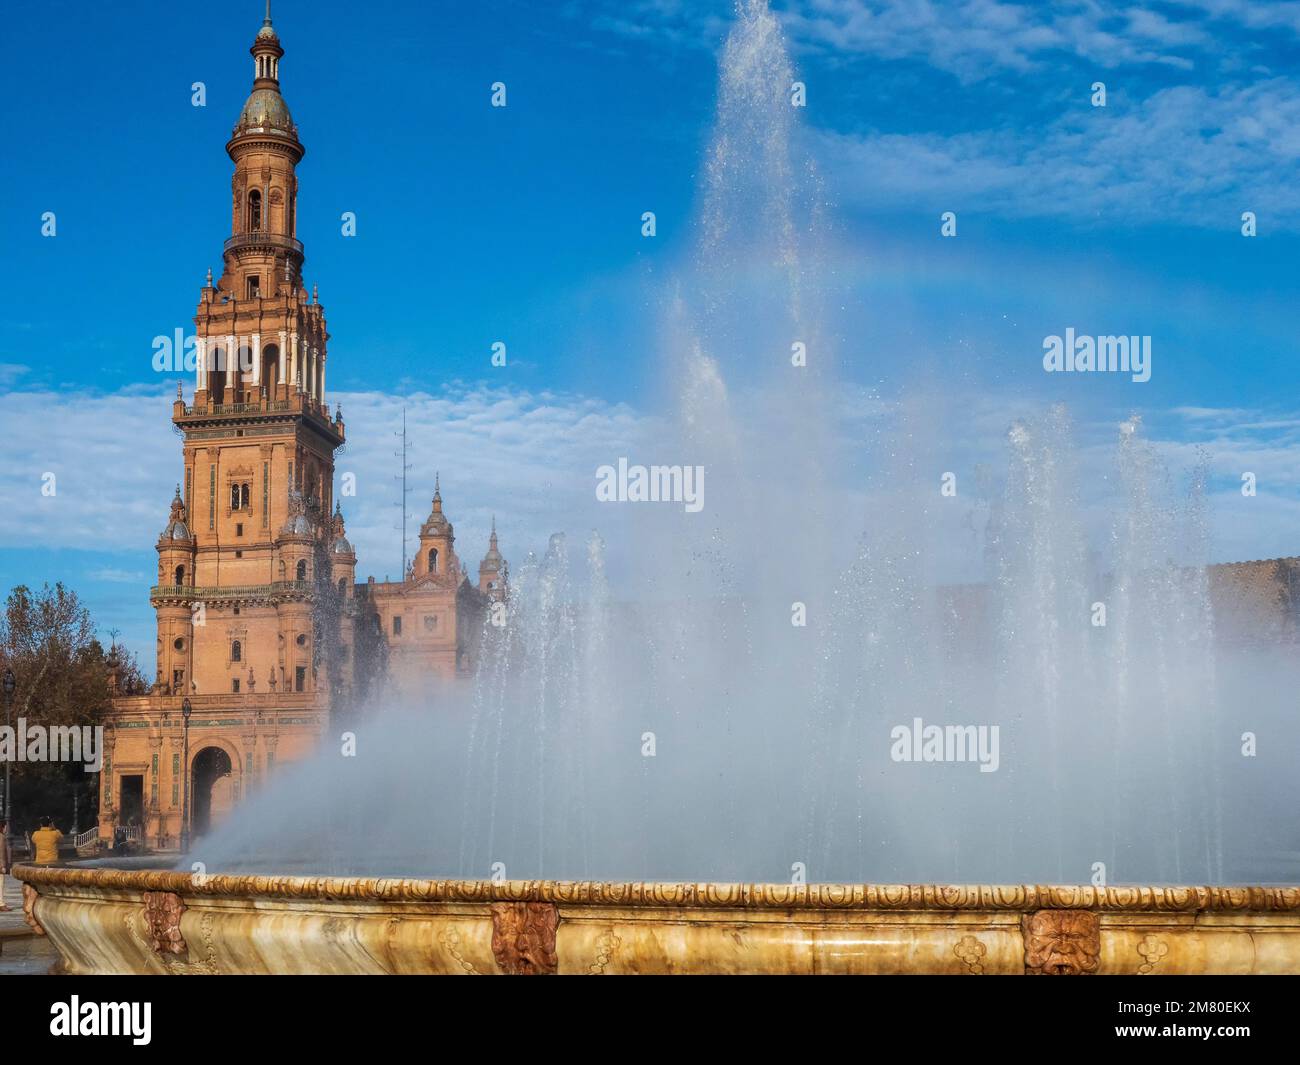 Water flows from the fountain in the Plaza de España in Seville. Stock Photo